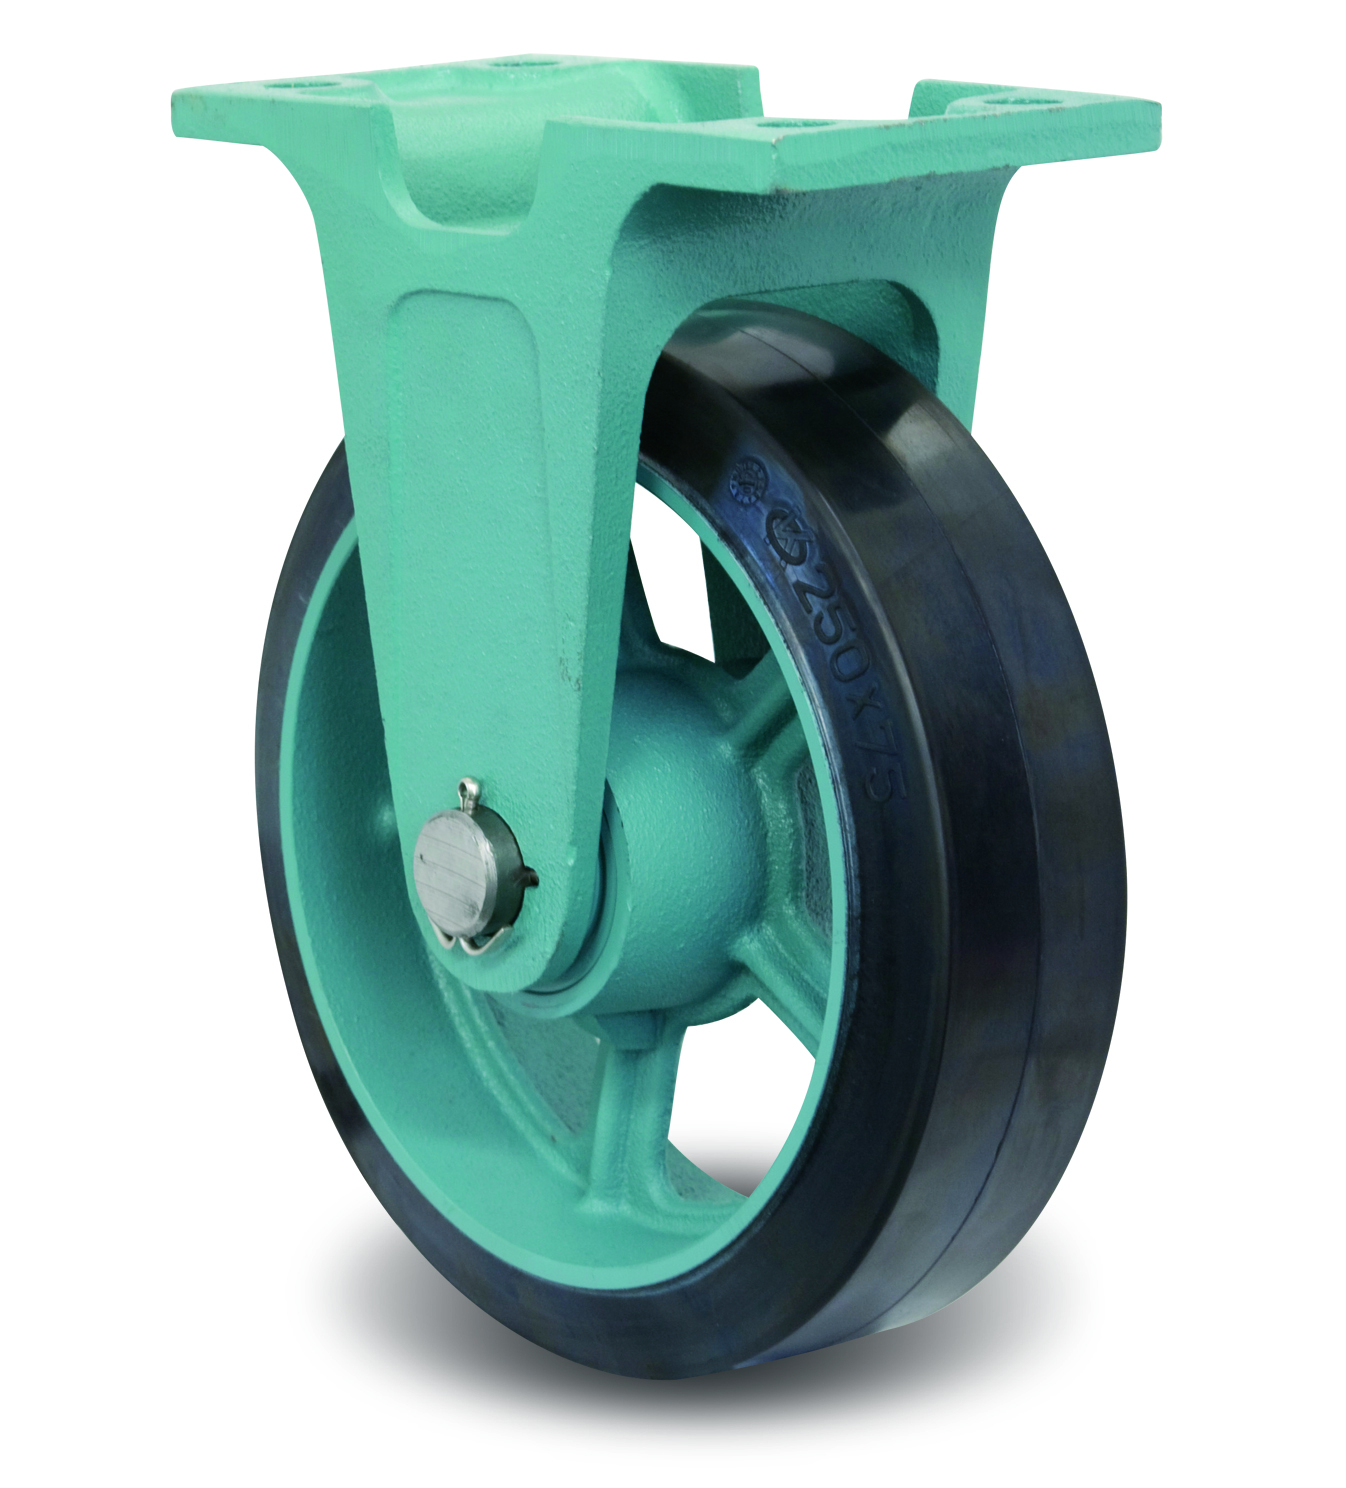 Ductile Caster Wide Type, Fixed MG-W Metal Fittings, E-MG-W (EMG-W200X75) 